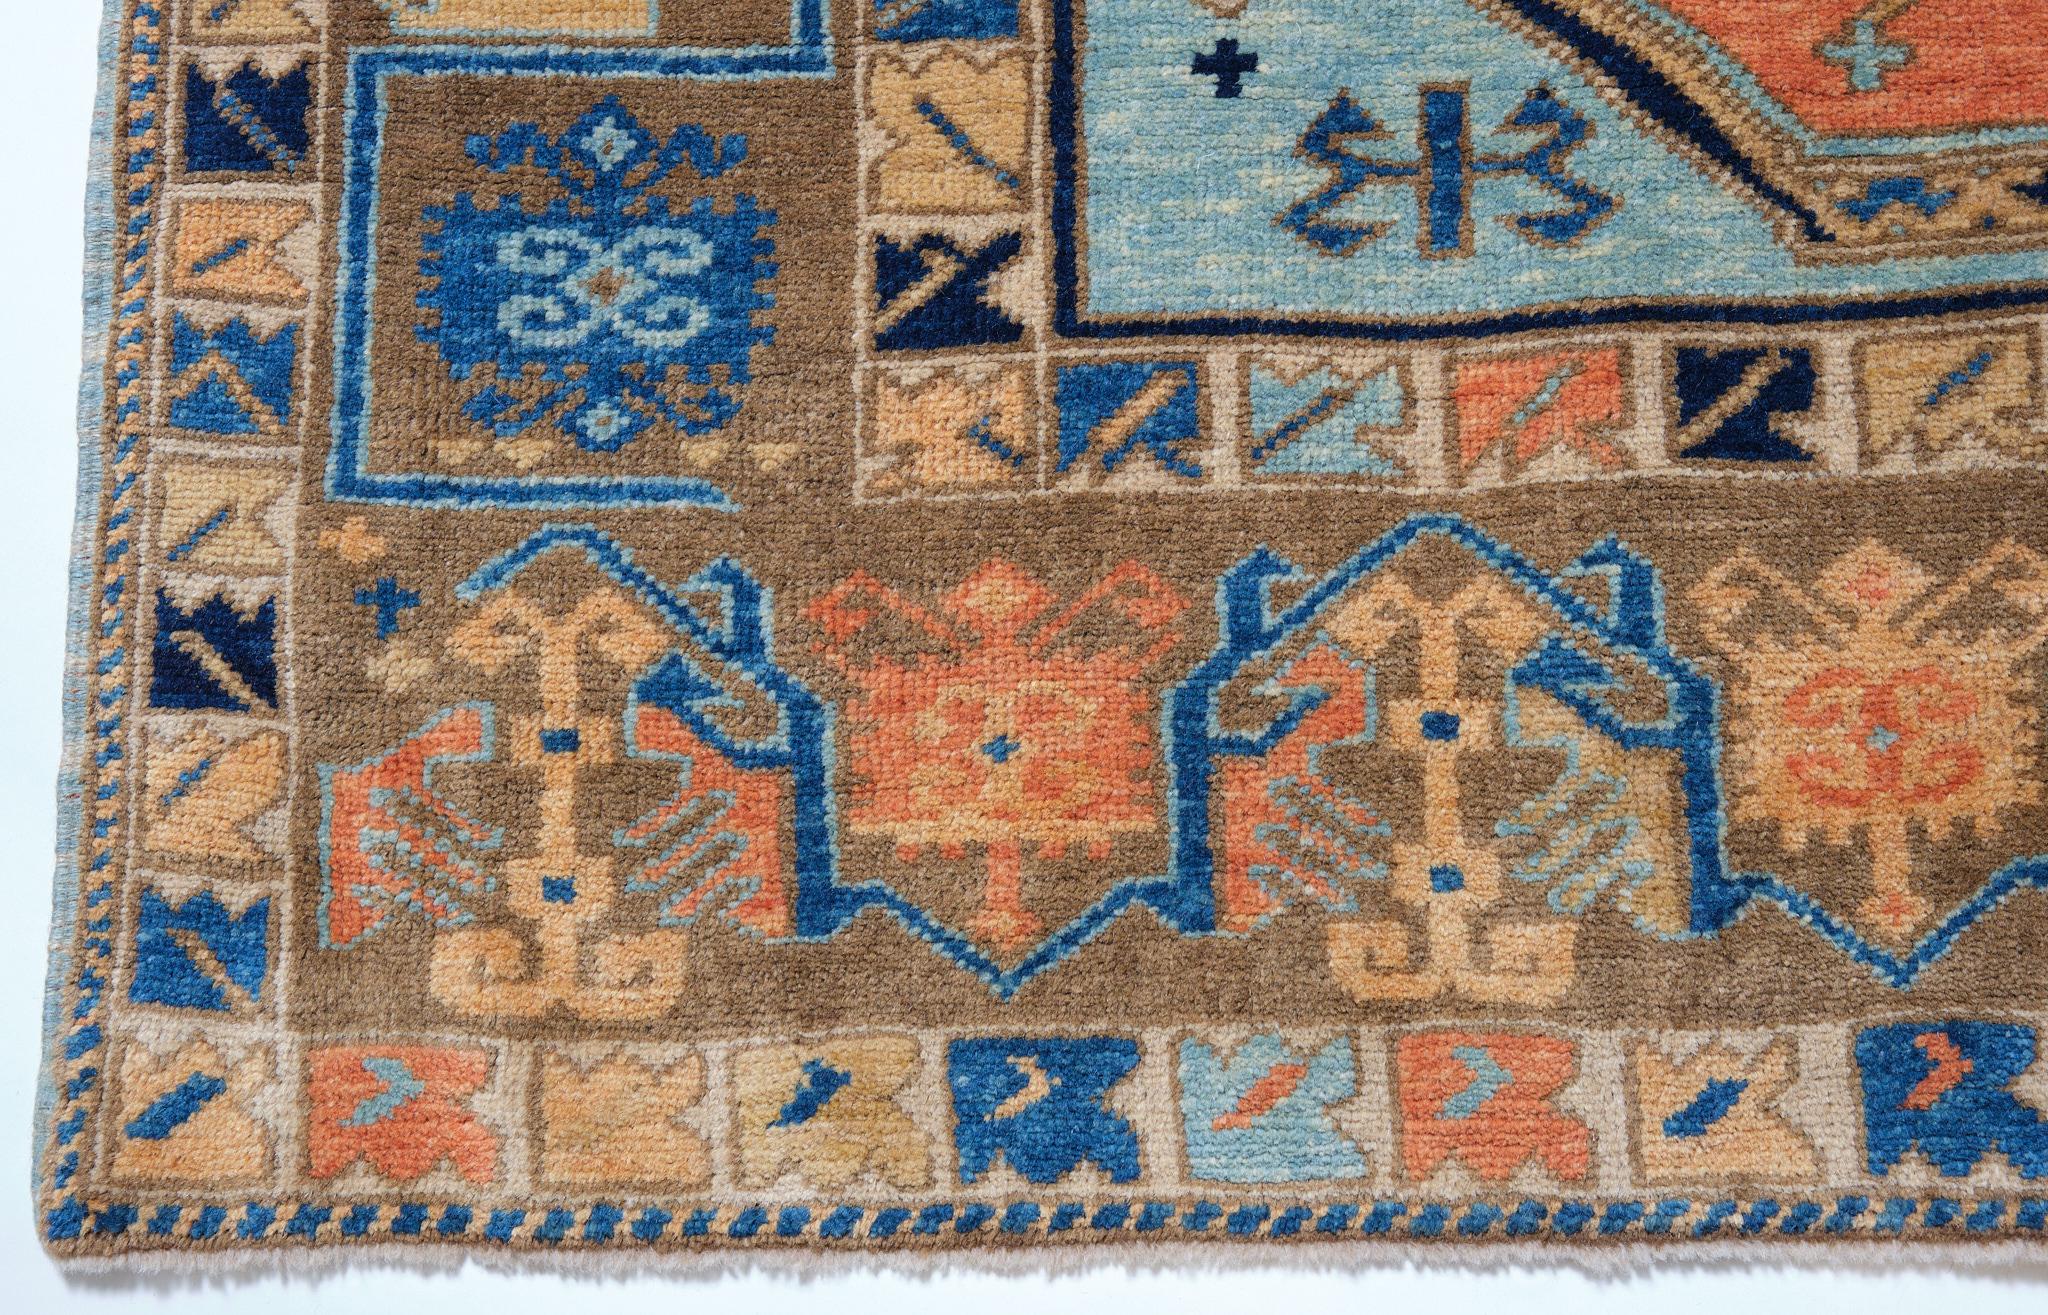 The source of the rug comes from the book Orient Star – A Carpet Collection, E. Heinrich Kirchheim, Hali Publications Ltd, 1993 nr.172. This is a unique, lacking formal arrangement design 18th-century rug from the Central Anatolia area, Turkey. The